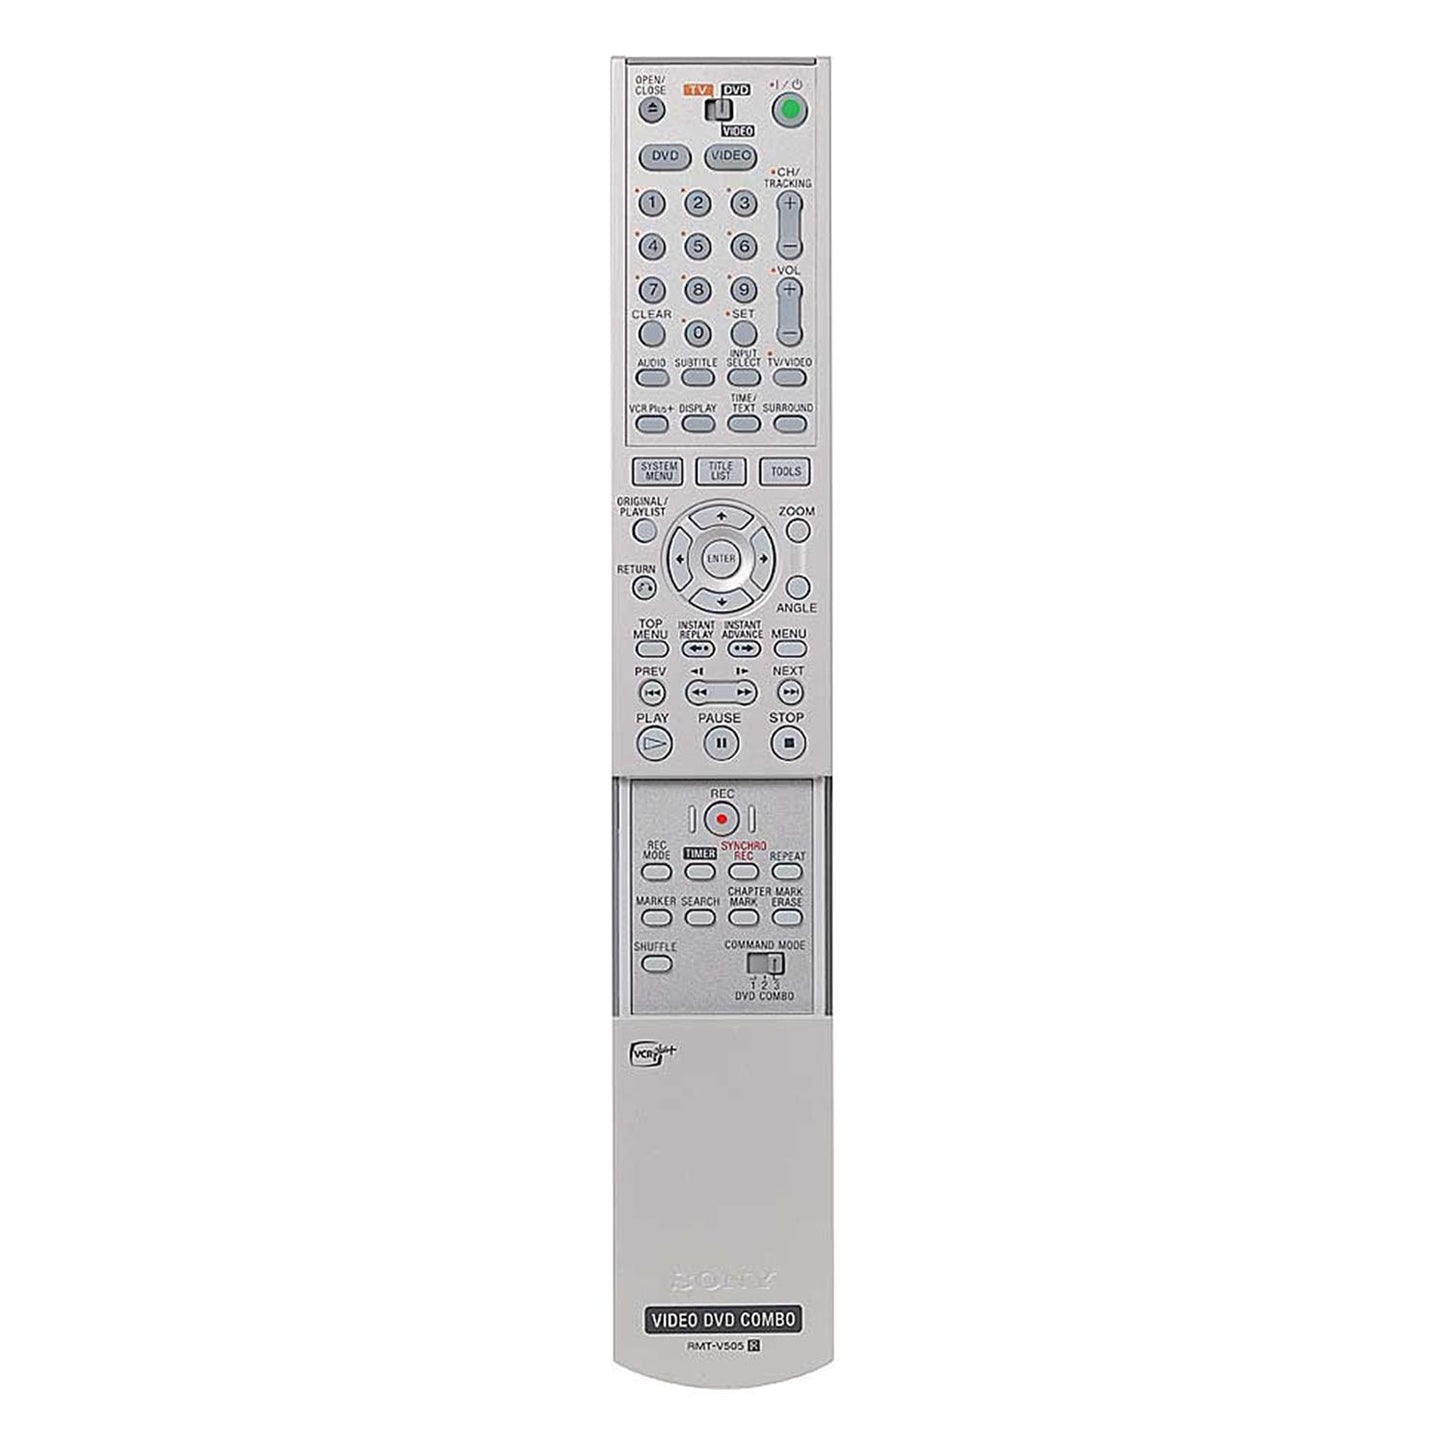 Sony RDR-VX500 VCR/DVD Recorder Combo - Remote Control, Door Open